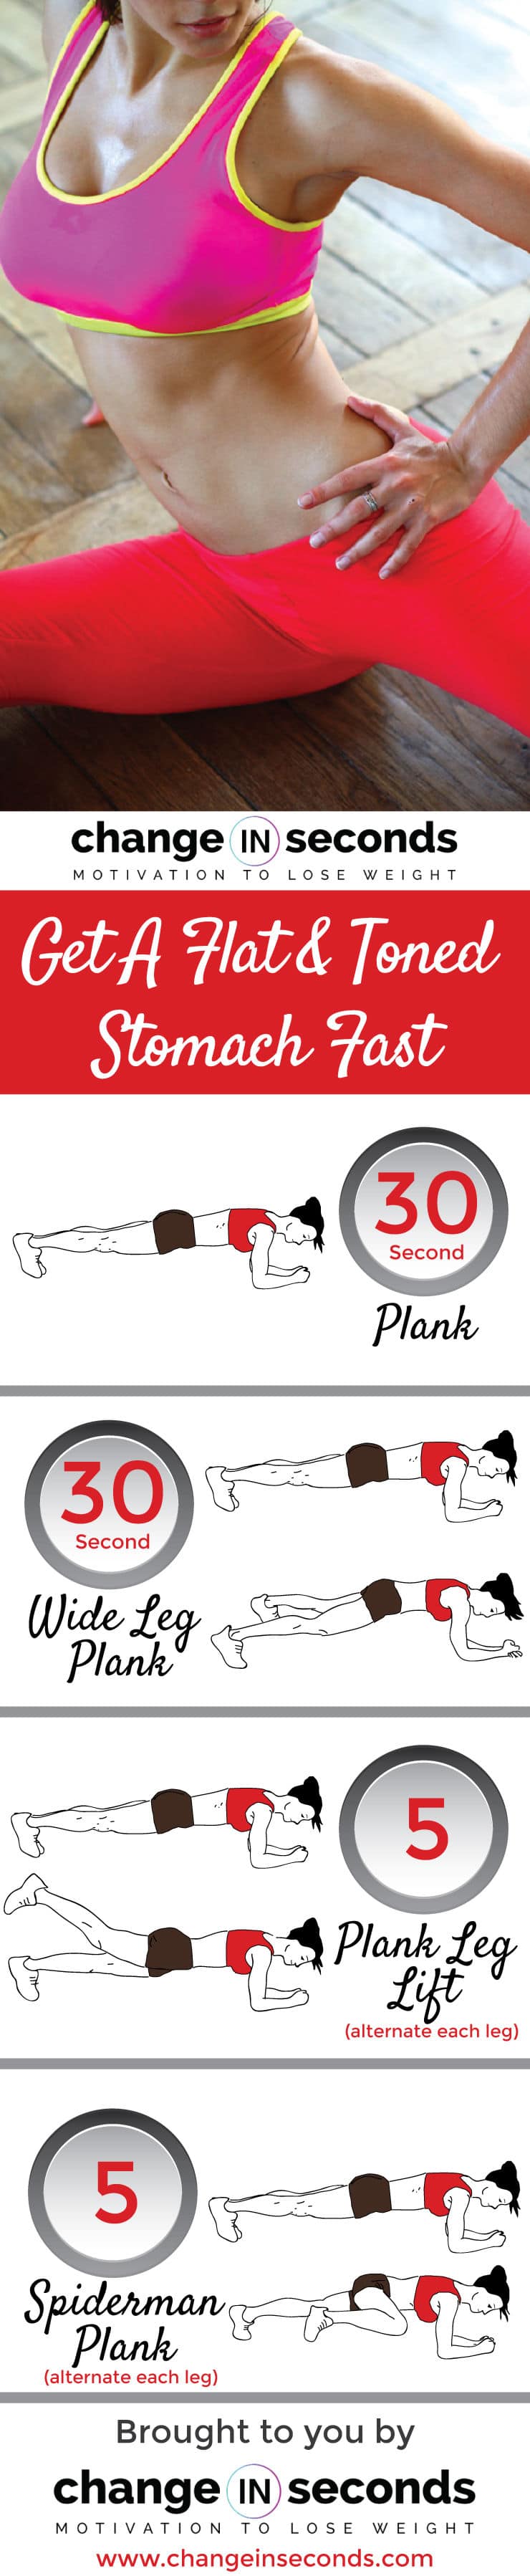 Flat And Toned Stomach Fast